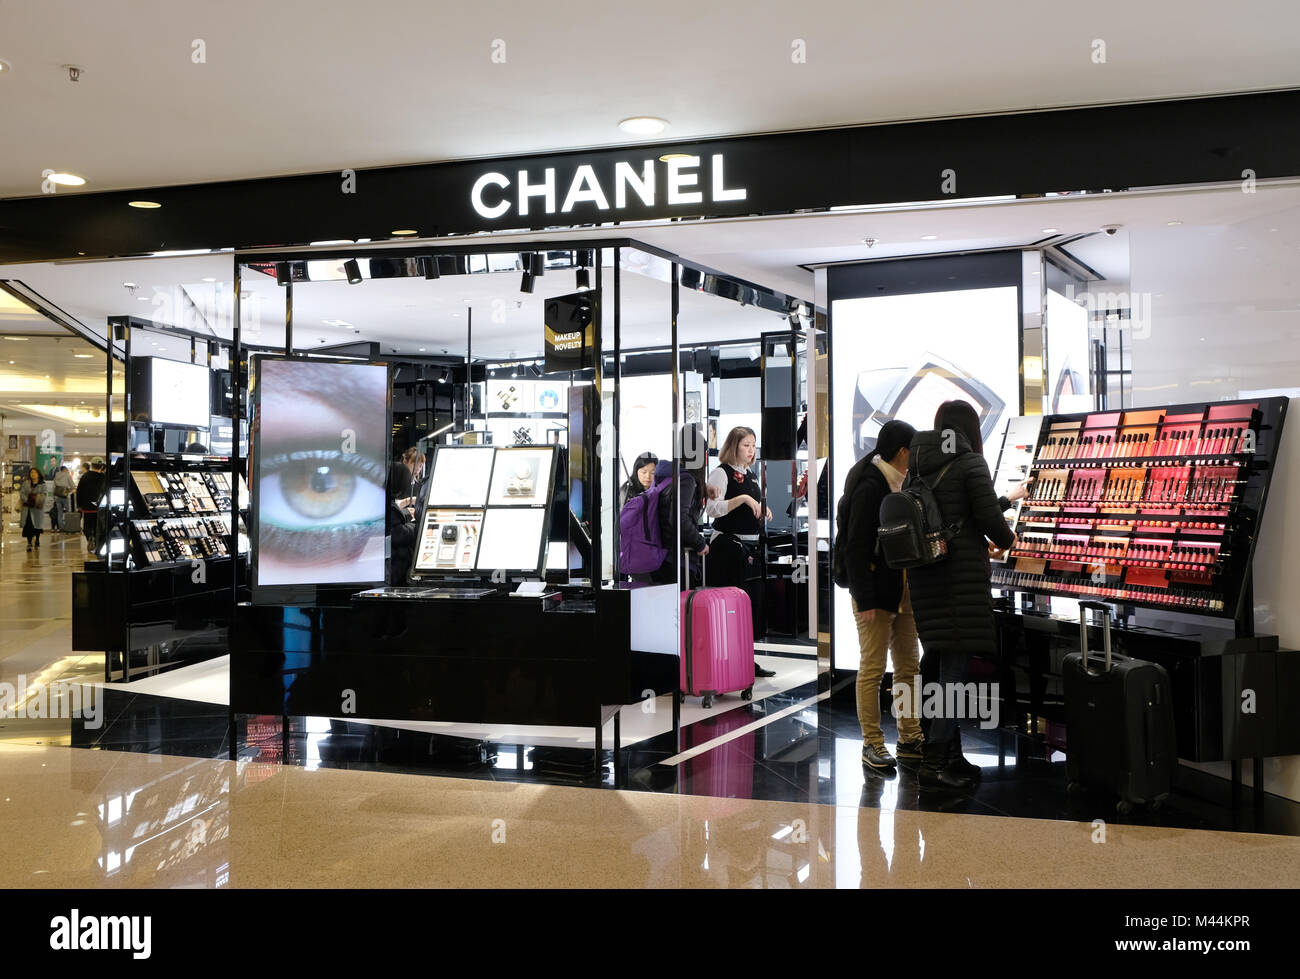 HONG KONG - FEBRUARY 4, 2018: Chanel store in Hong Kong. Chanel is one of many luxury brands fashion company with world renown. Stock Photo